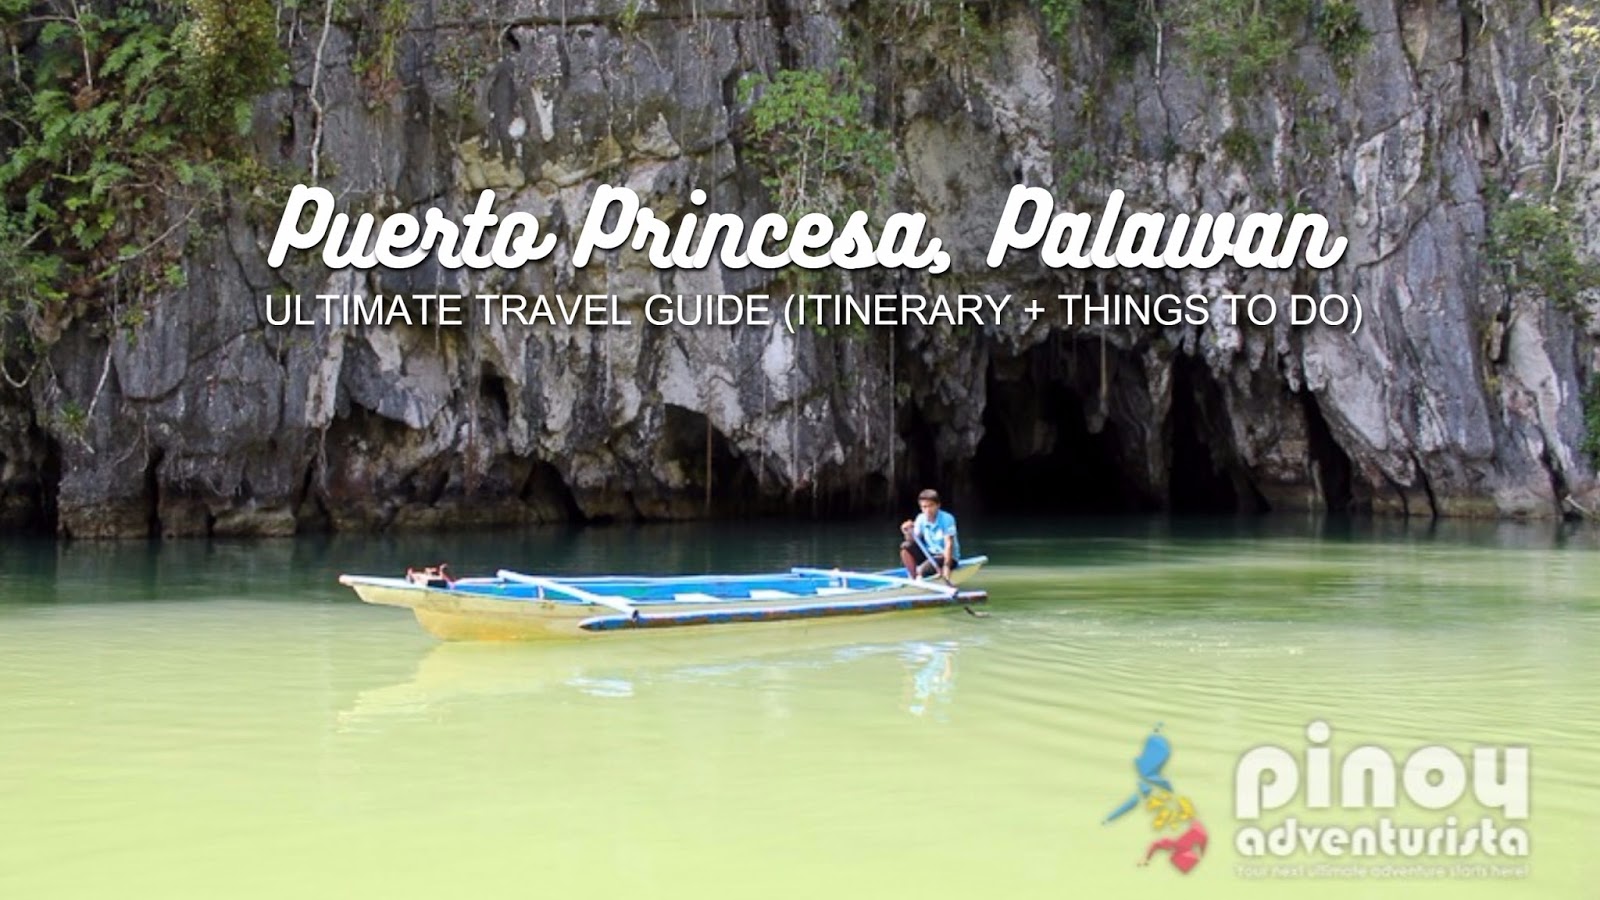 arrastrar Delegar Anémona de mar PALAWAN ITINERARY: Things to Do in Puerto Princesa, Tourist Spots and  Places to Visit (Travel Guide Blog 2023 for First-timers) | Blogs, Travel  Guides, Things to Do, Tourist Spots, DIY Itinerary, Hotel